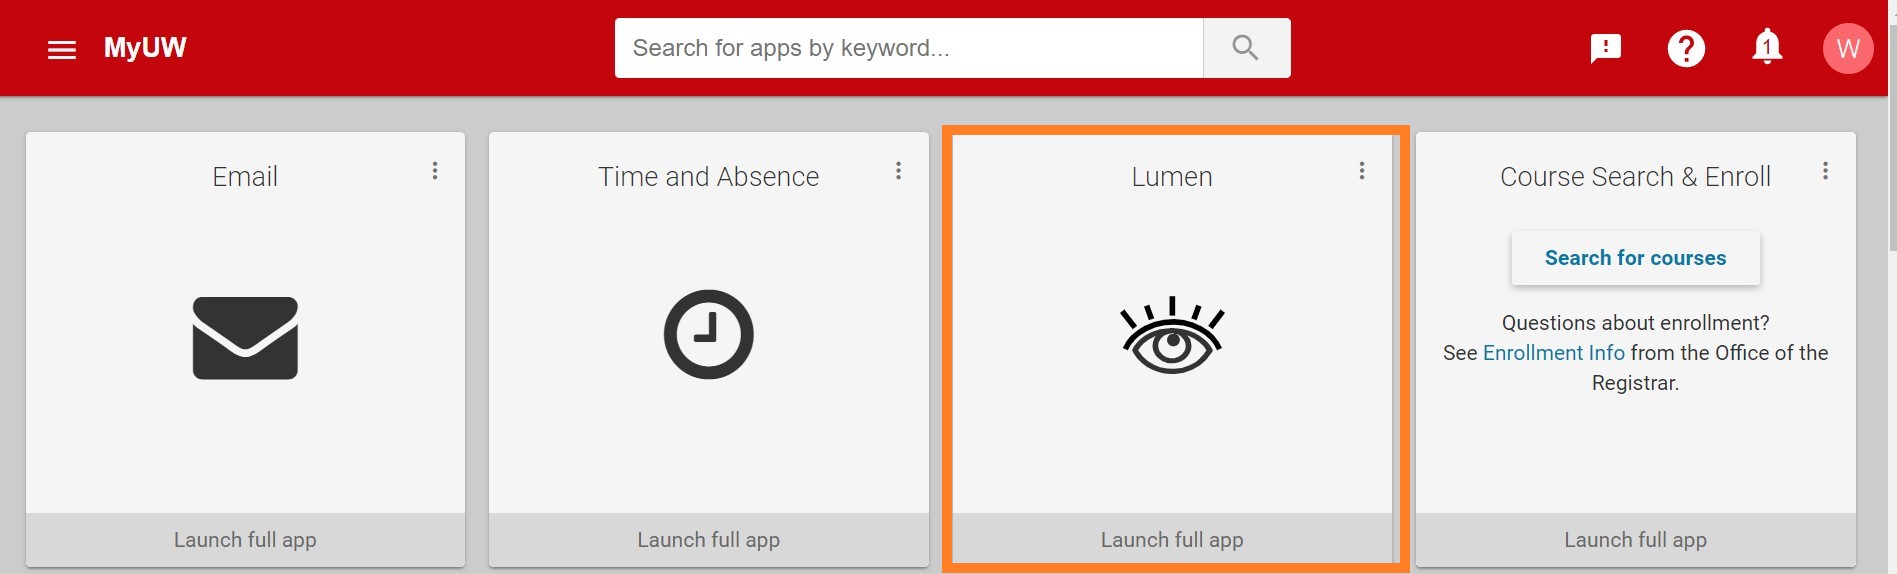 Image of MyUW homepage with Lumen tile highlighted